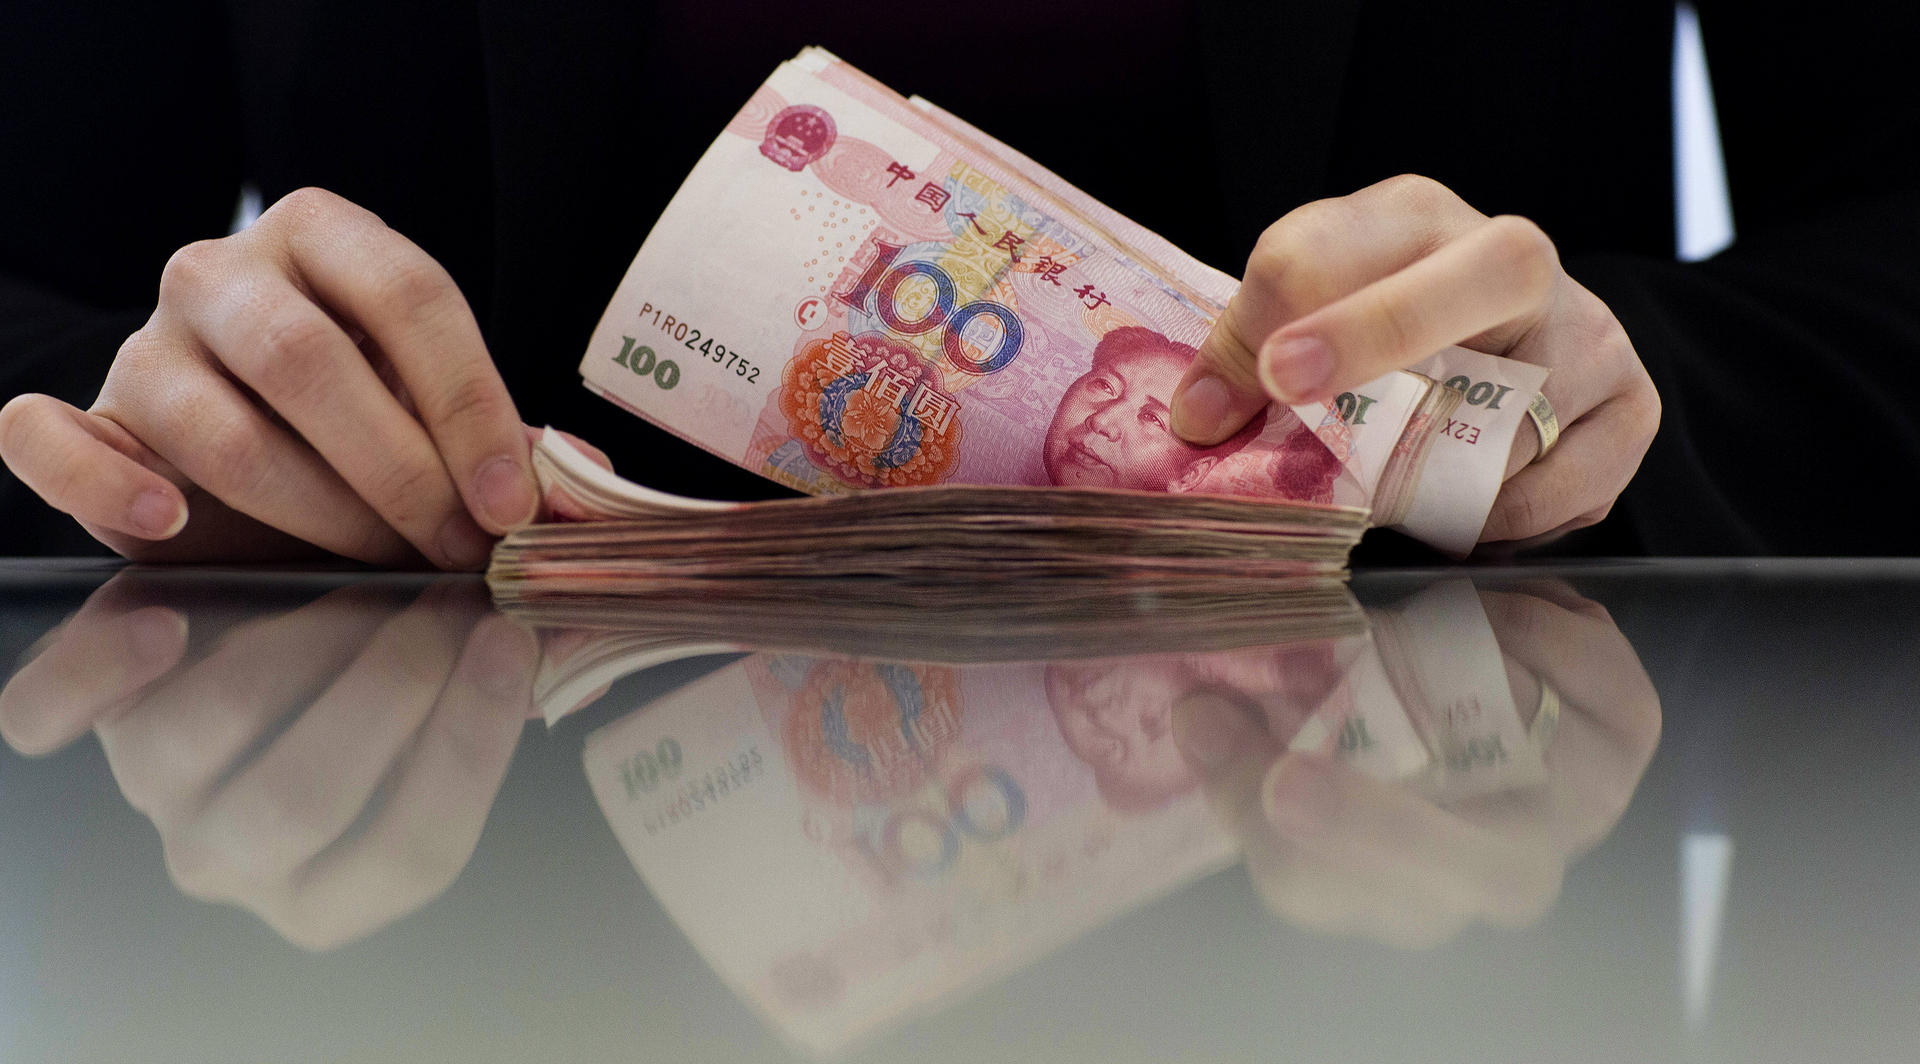 Hong Kong's yuan deposits swelled to 920.3 billion yuan at the end of February. Retail investors are seen as remaining optimistic about the currency. Photo: Bloomberg